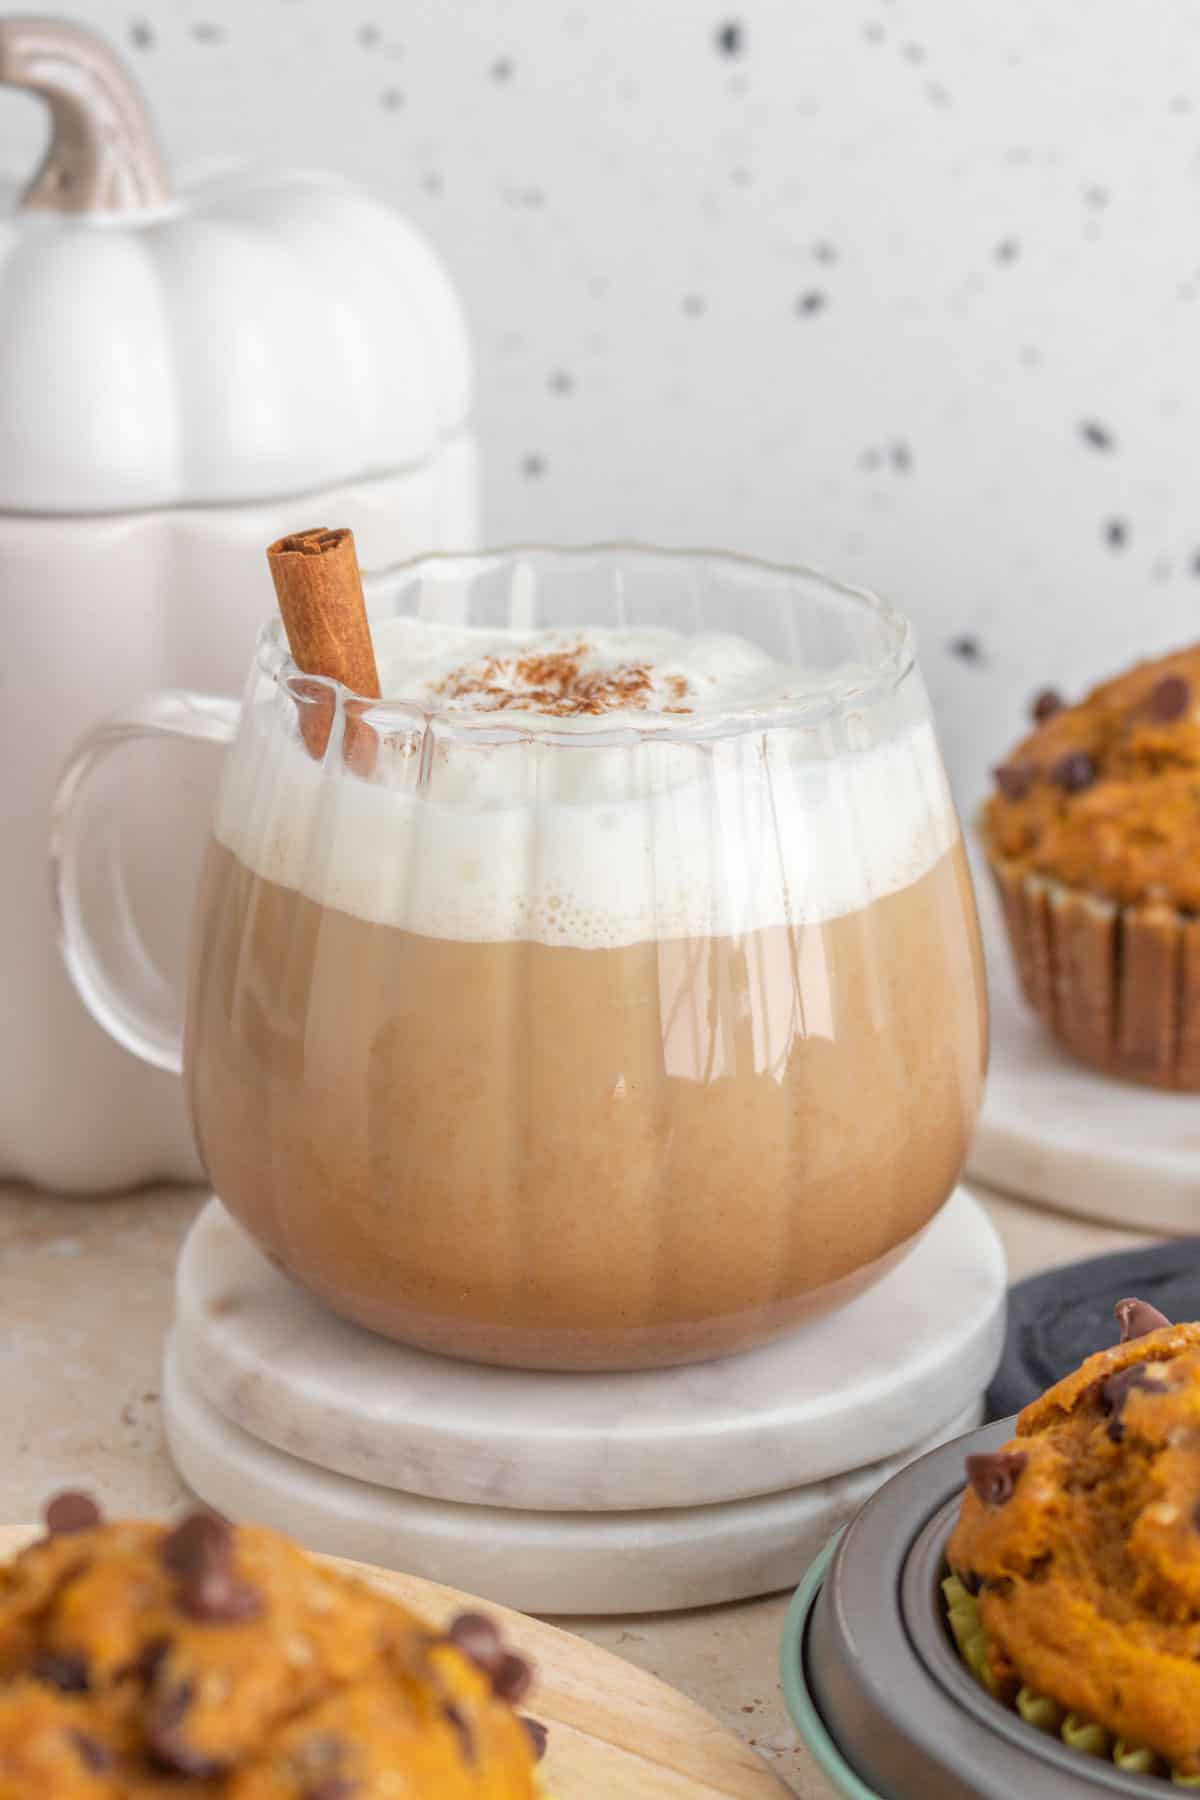 A mug of pumpkin spice latte with a cinnamon stick inserted, surrounded by muffins.